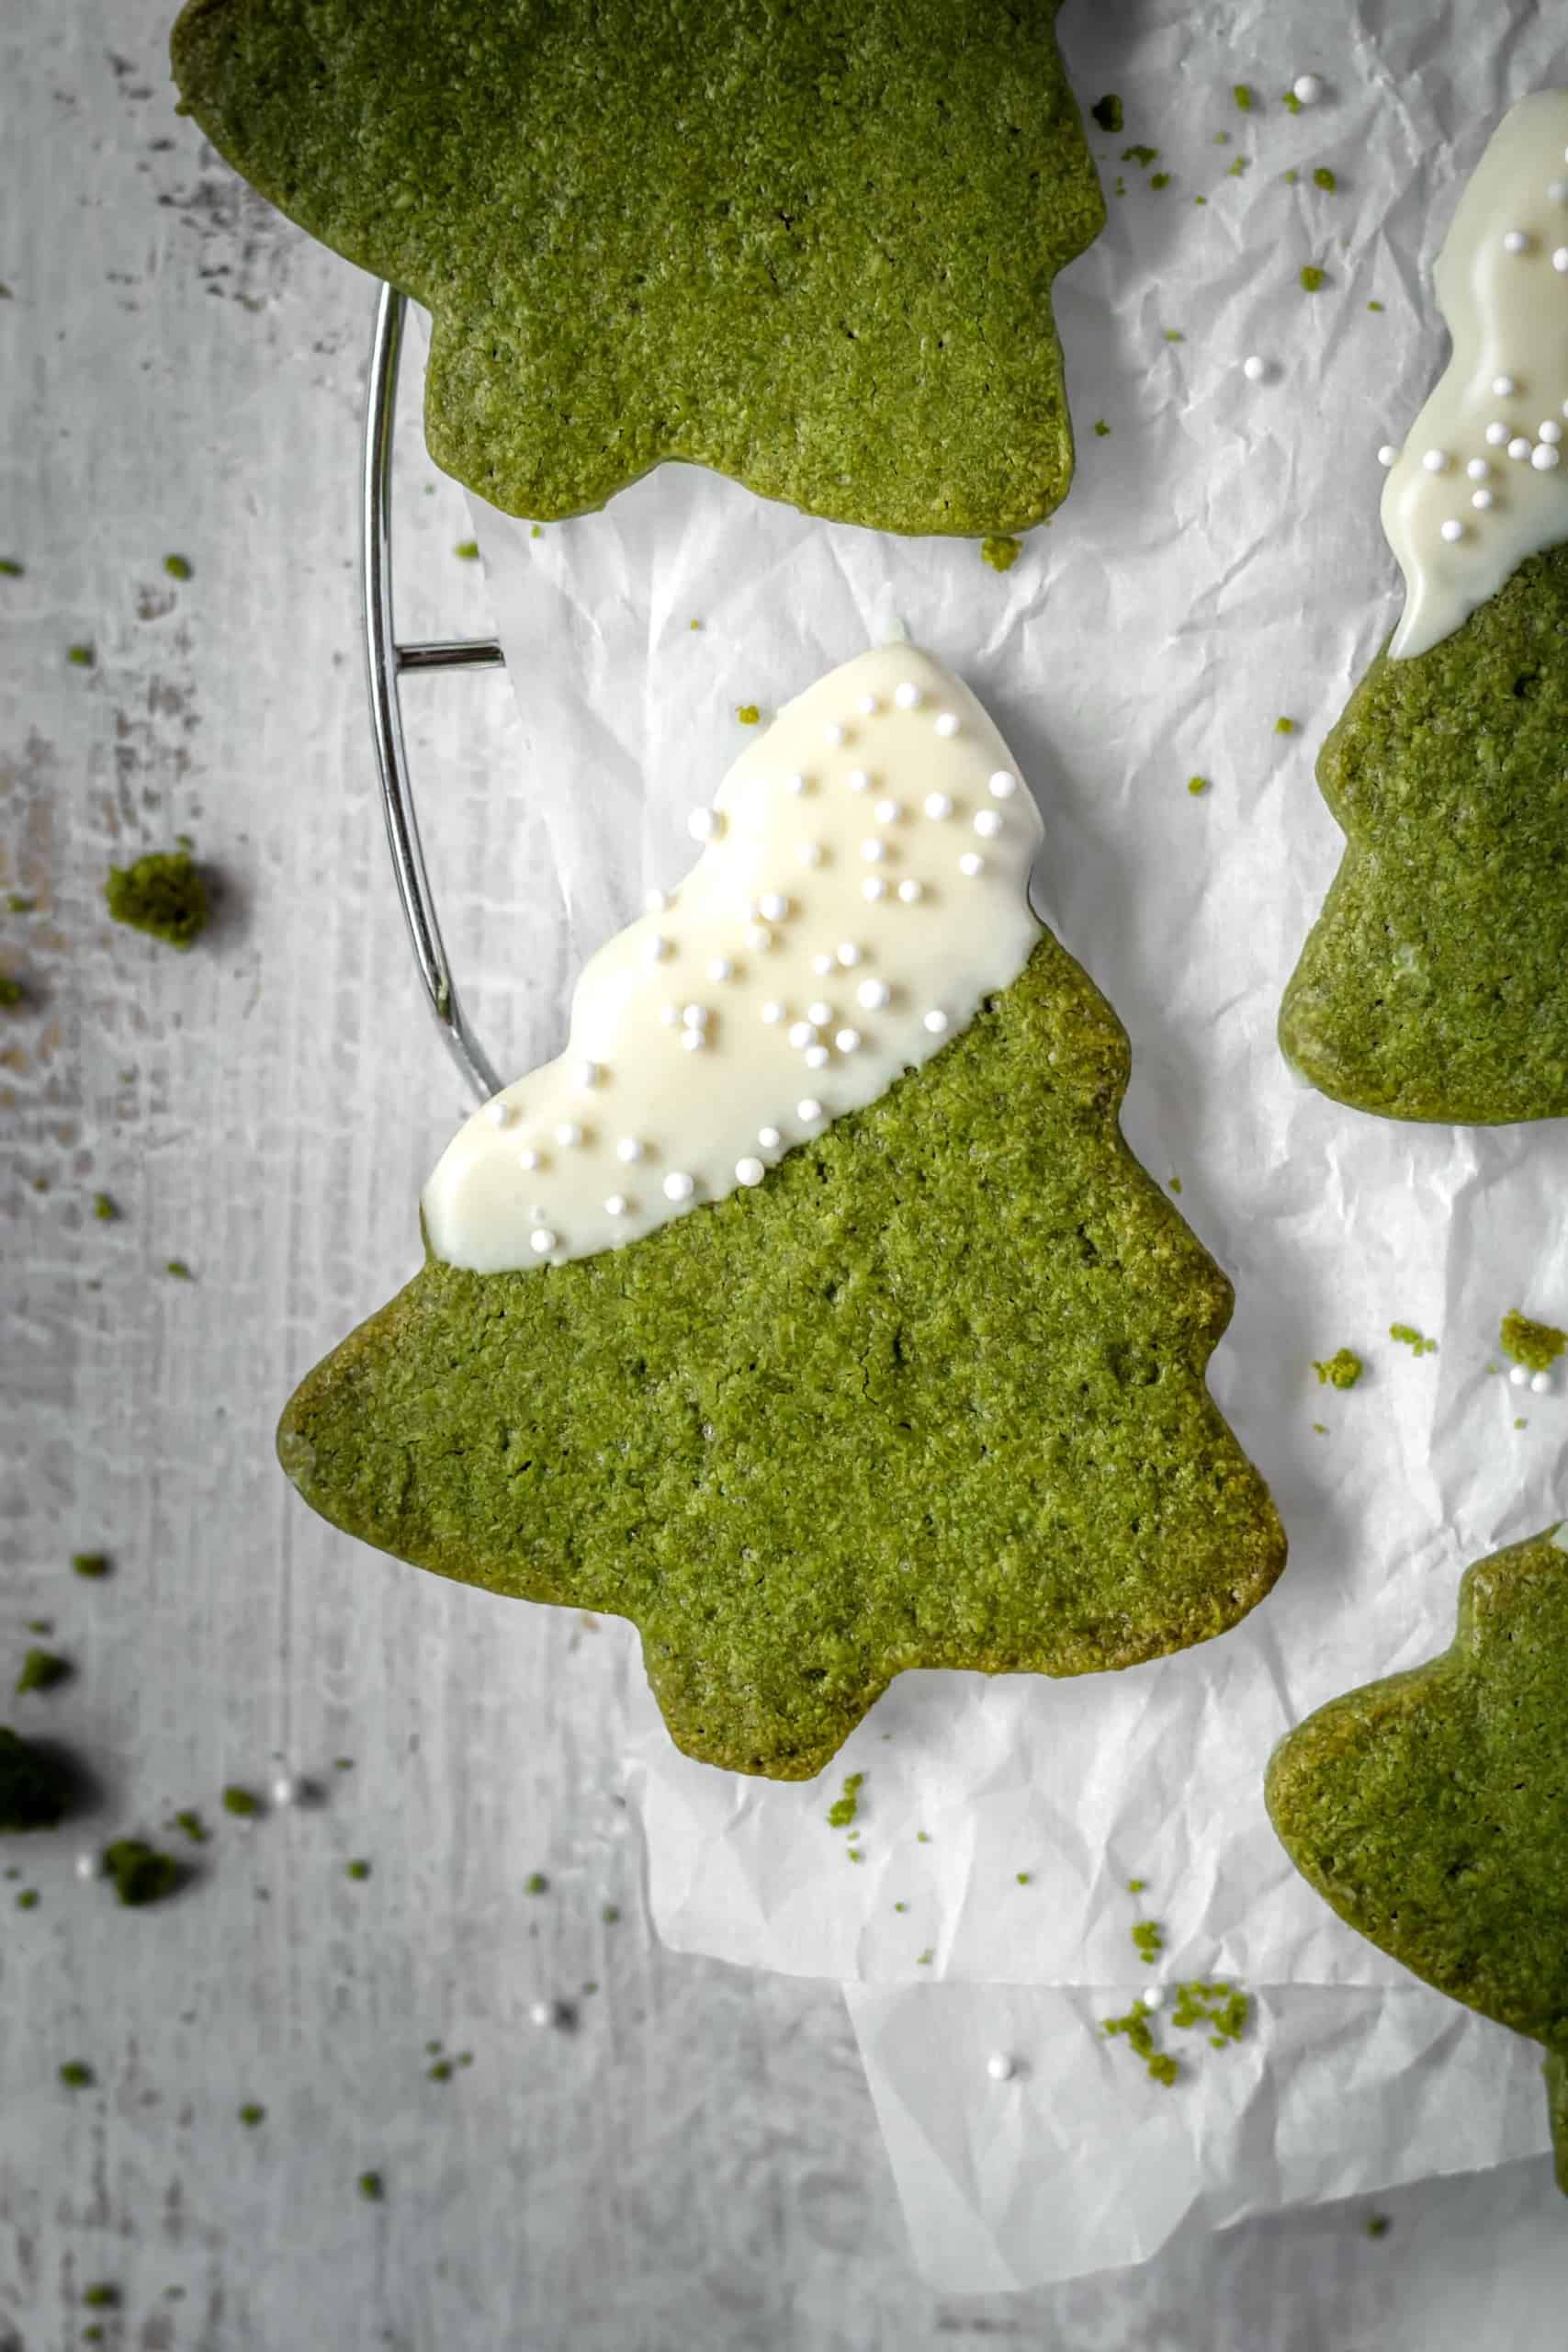 Matcha Christmas tree cookies are the perfect treats this holiday season that don’t include any food coloring! Super easy Christmas cookies! #christmastree #christmastreecookies #christmascookies #matchacookies #easychristmascookies